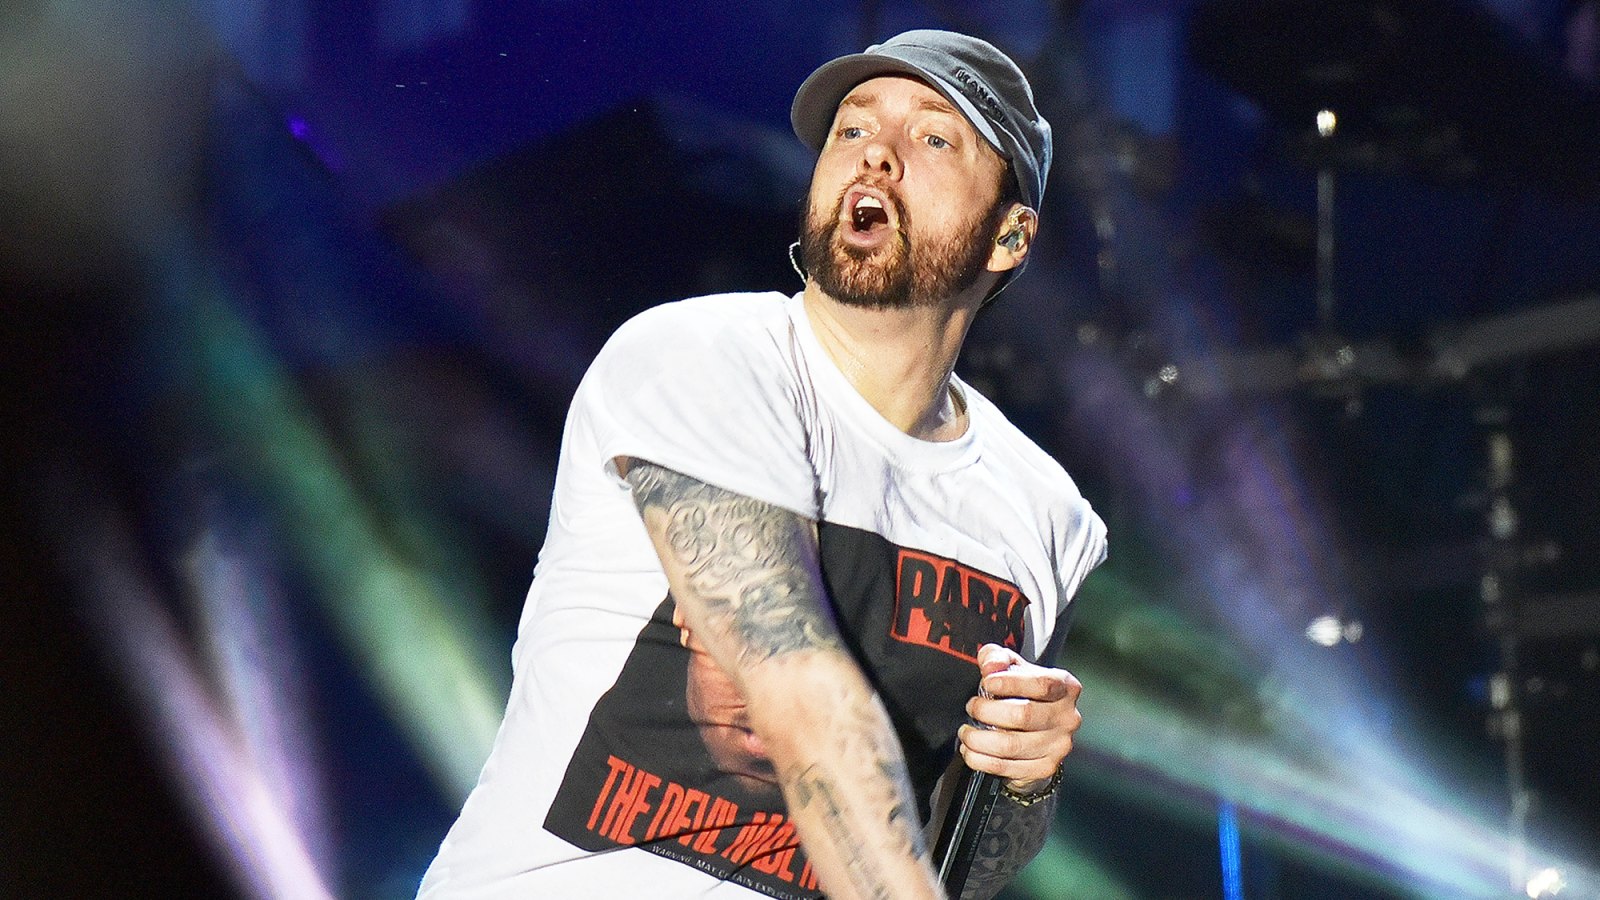 Eminem performs during the 2018 Bonnaroo Music & Arts Festival on June 9, 2018 in Manchester, Tennessee.